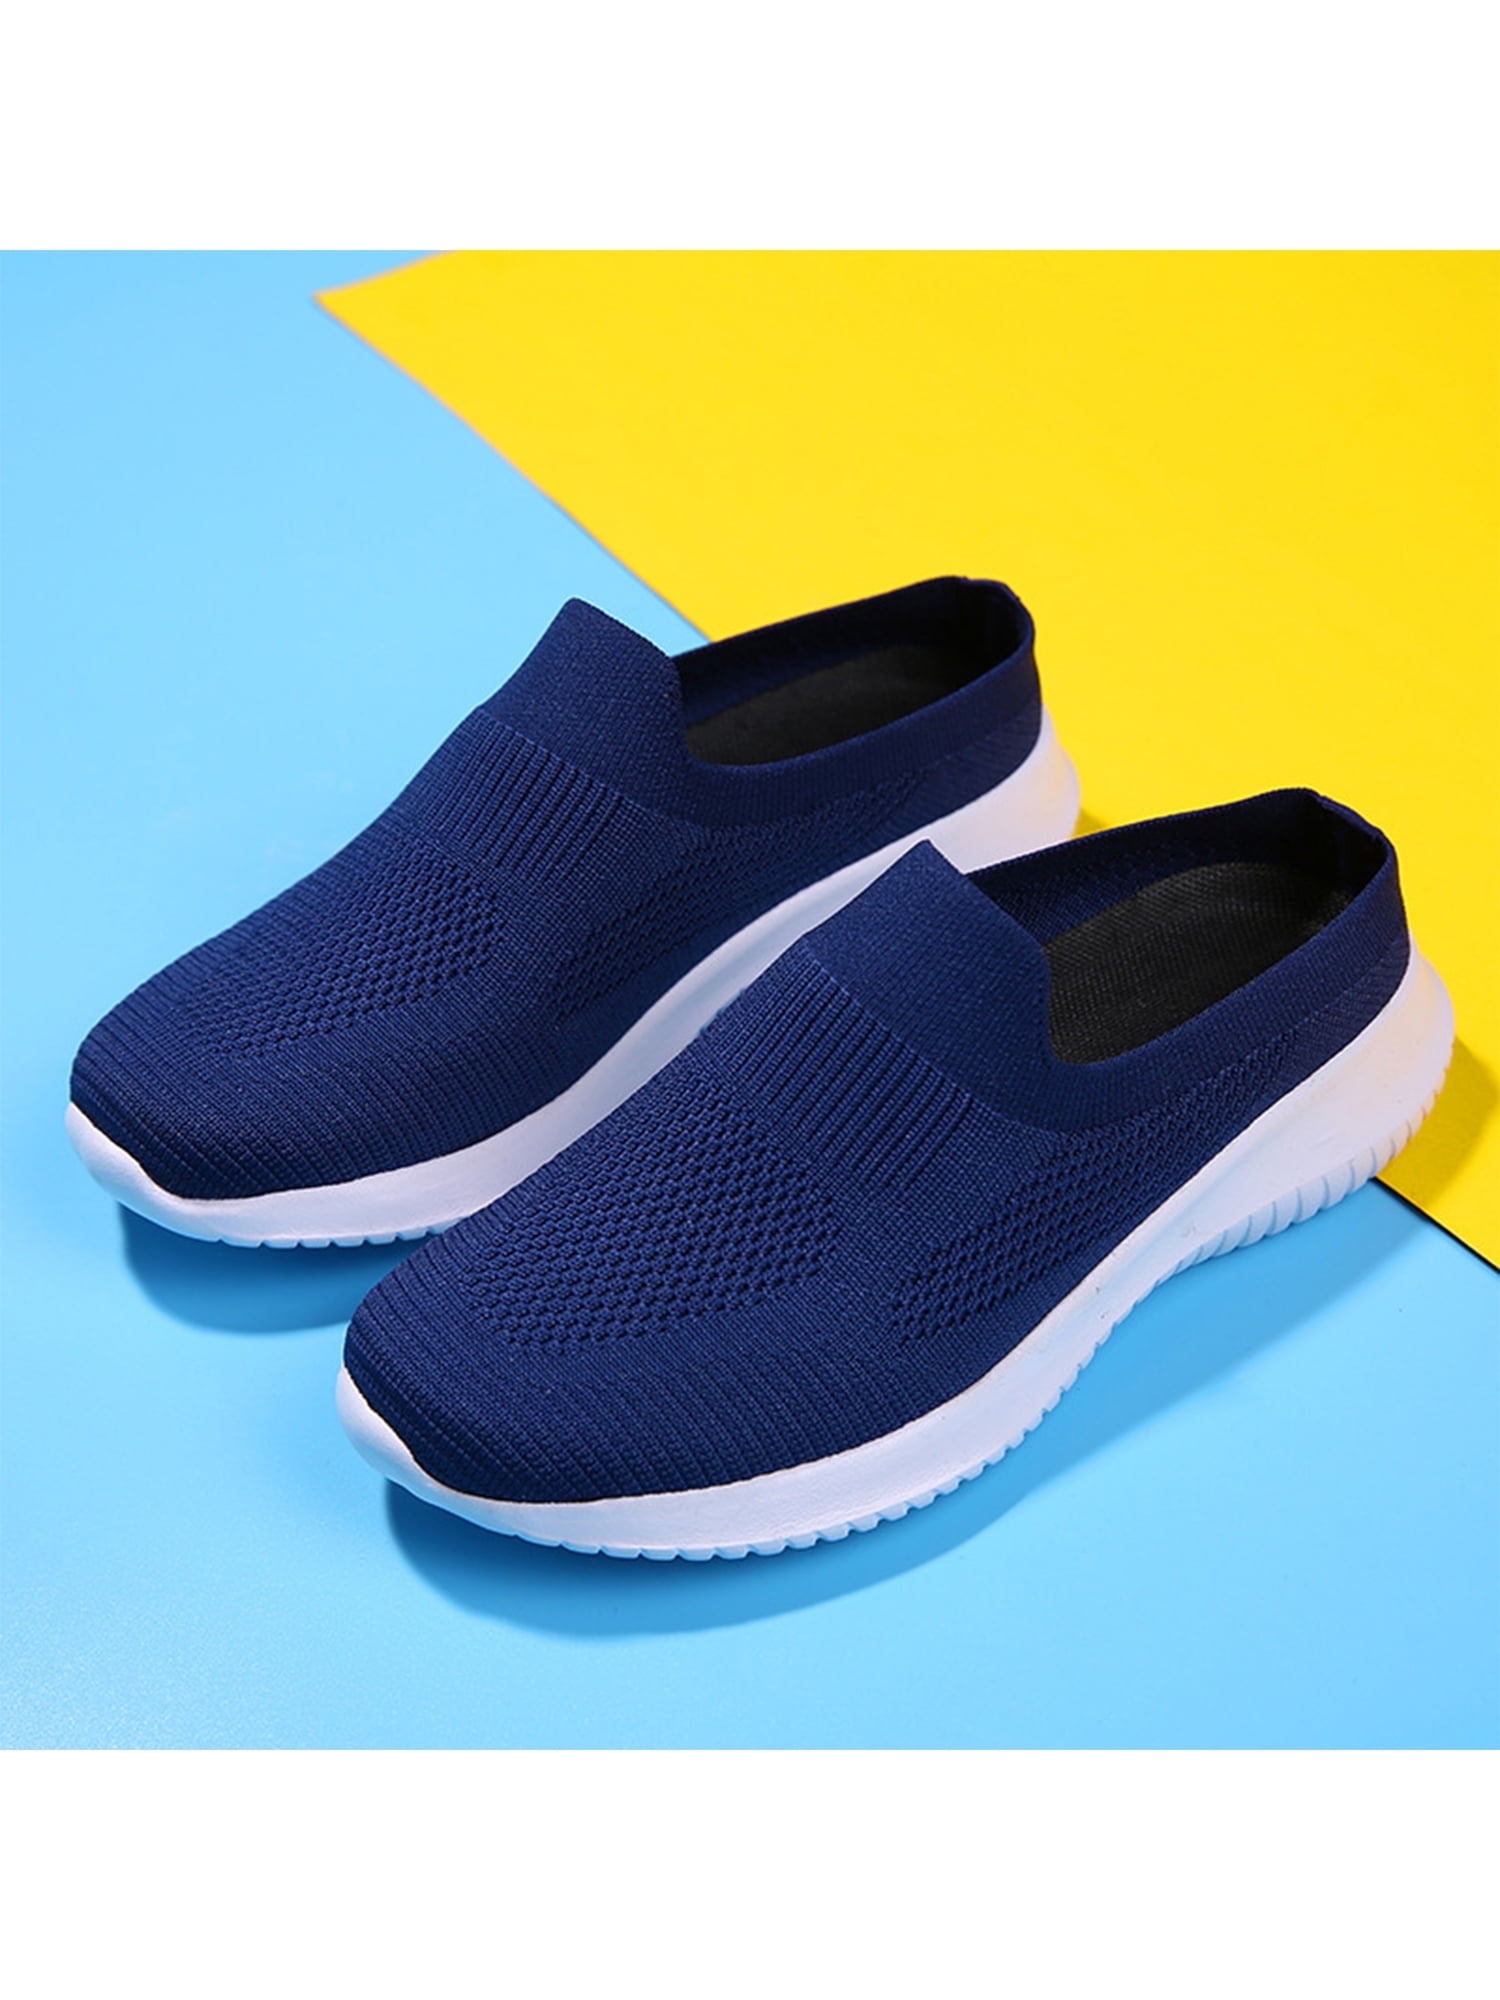 Mules Shoes for Women Slip on Sneakers Backless Walking Shoes Blue# 9 ...